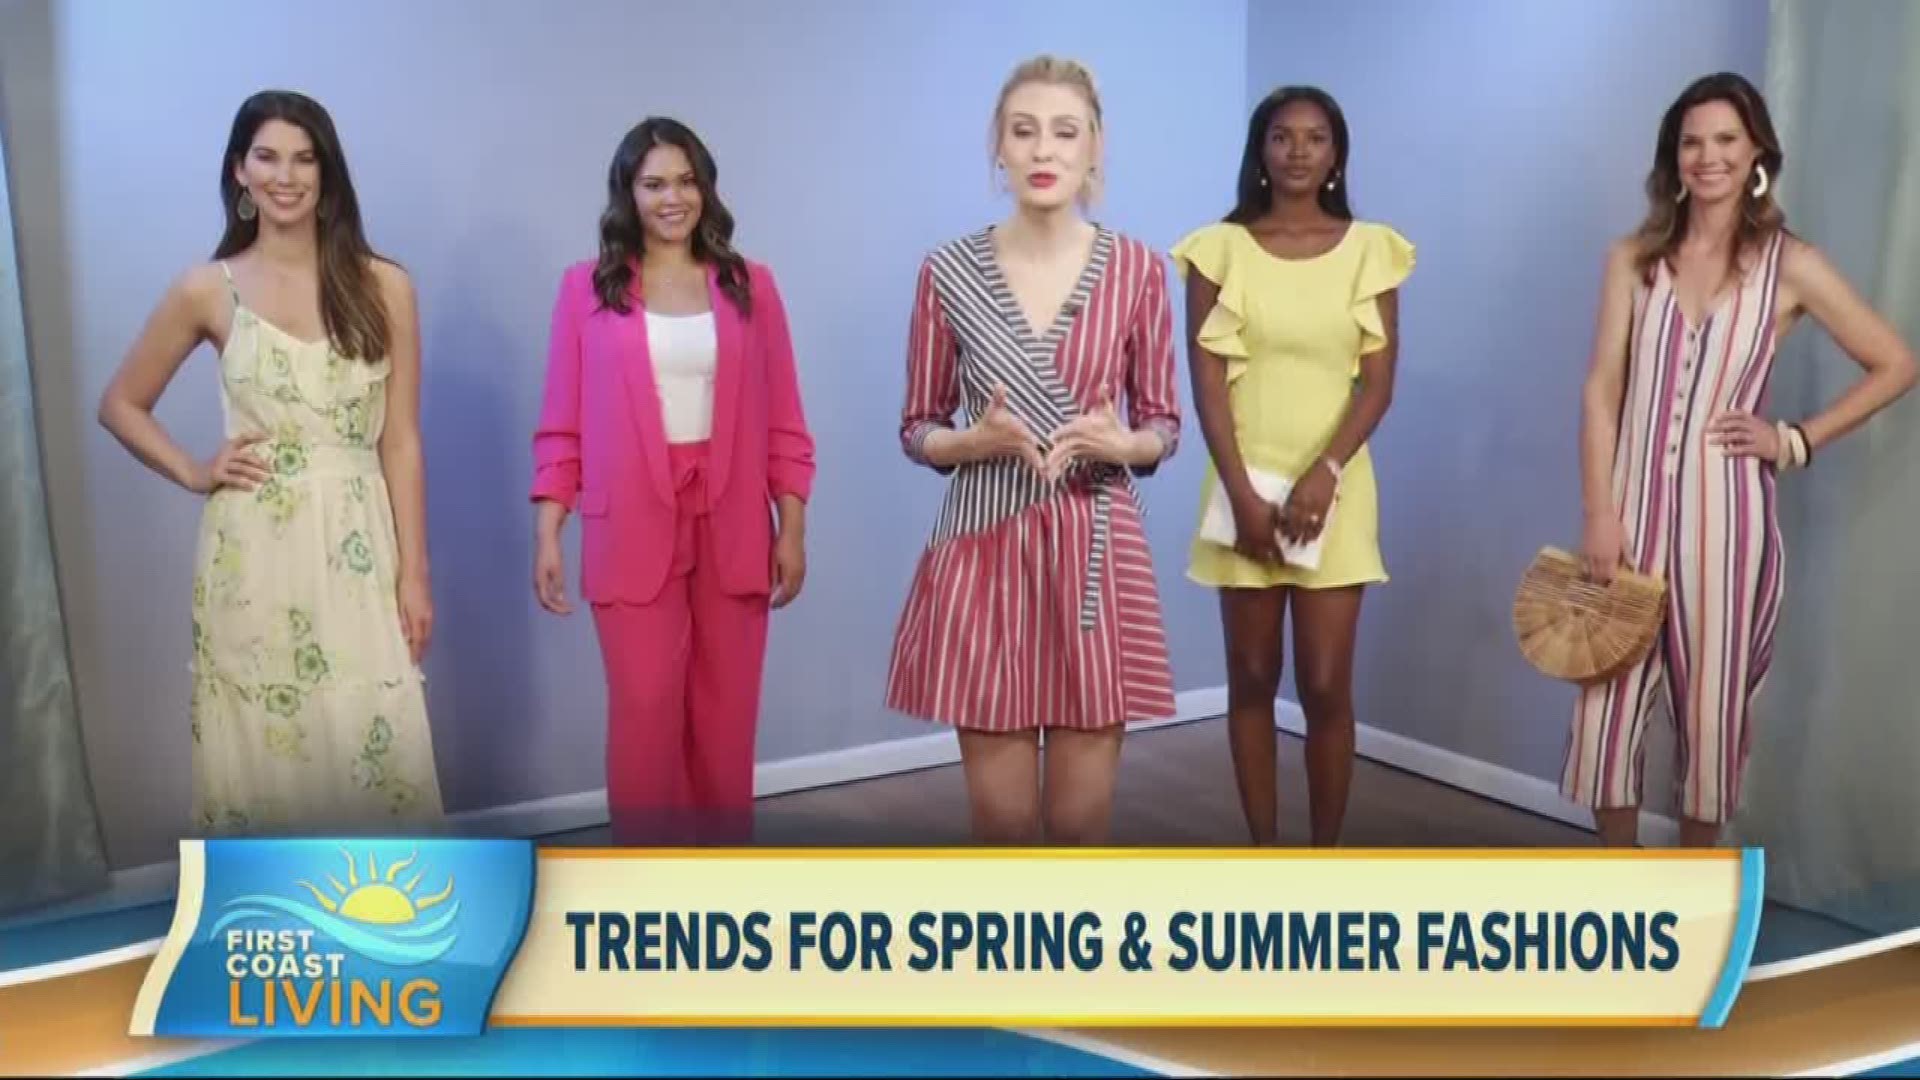 Get tips on how to incorporate the latest summer fashion trends from a celebrity lifestyle and beauty expert.